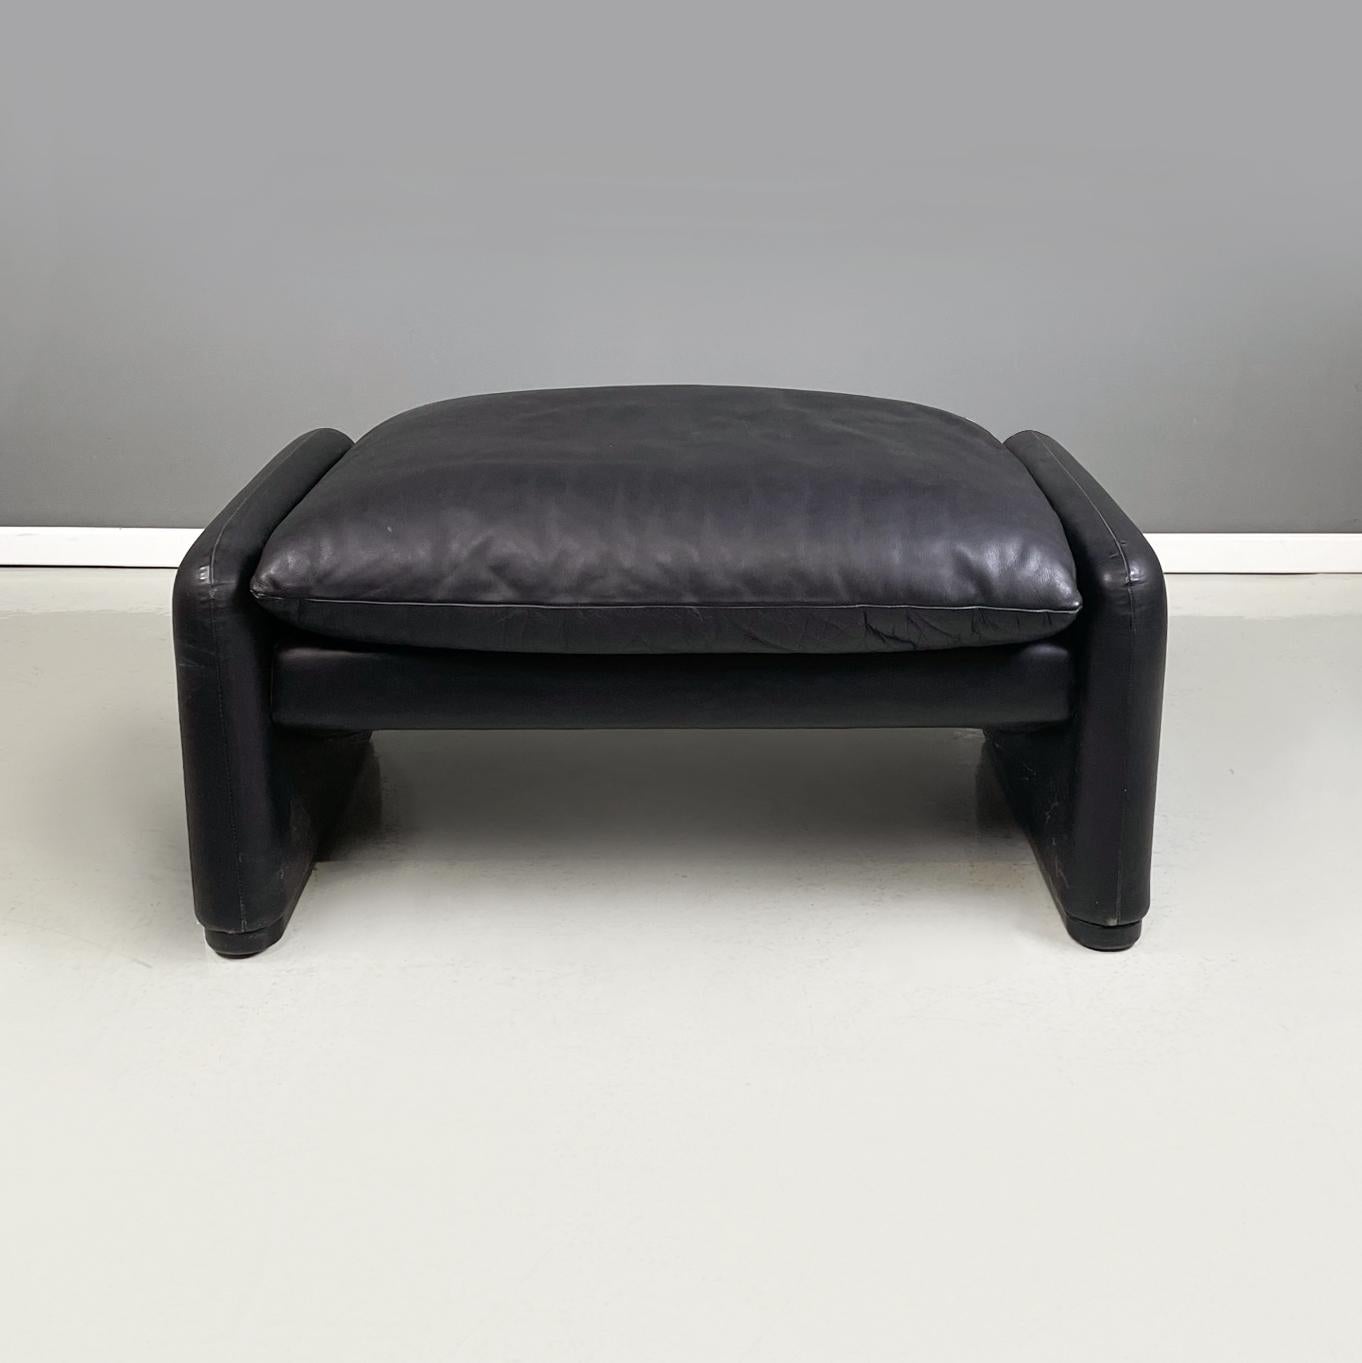 Italian modern Black leather Pouffe Maralunga by Magistretti for Cassina, 1980s
iconic and vintage ottoman mod. Maralunga, also known with the number 675, with rectangular soft cushion, padded and covered in black leather. The rounded structure with